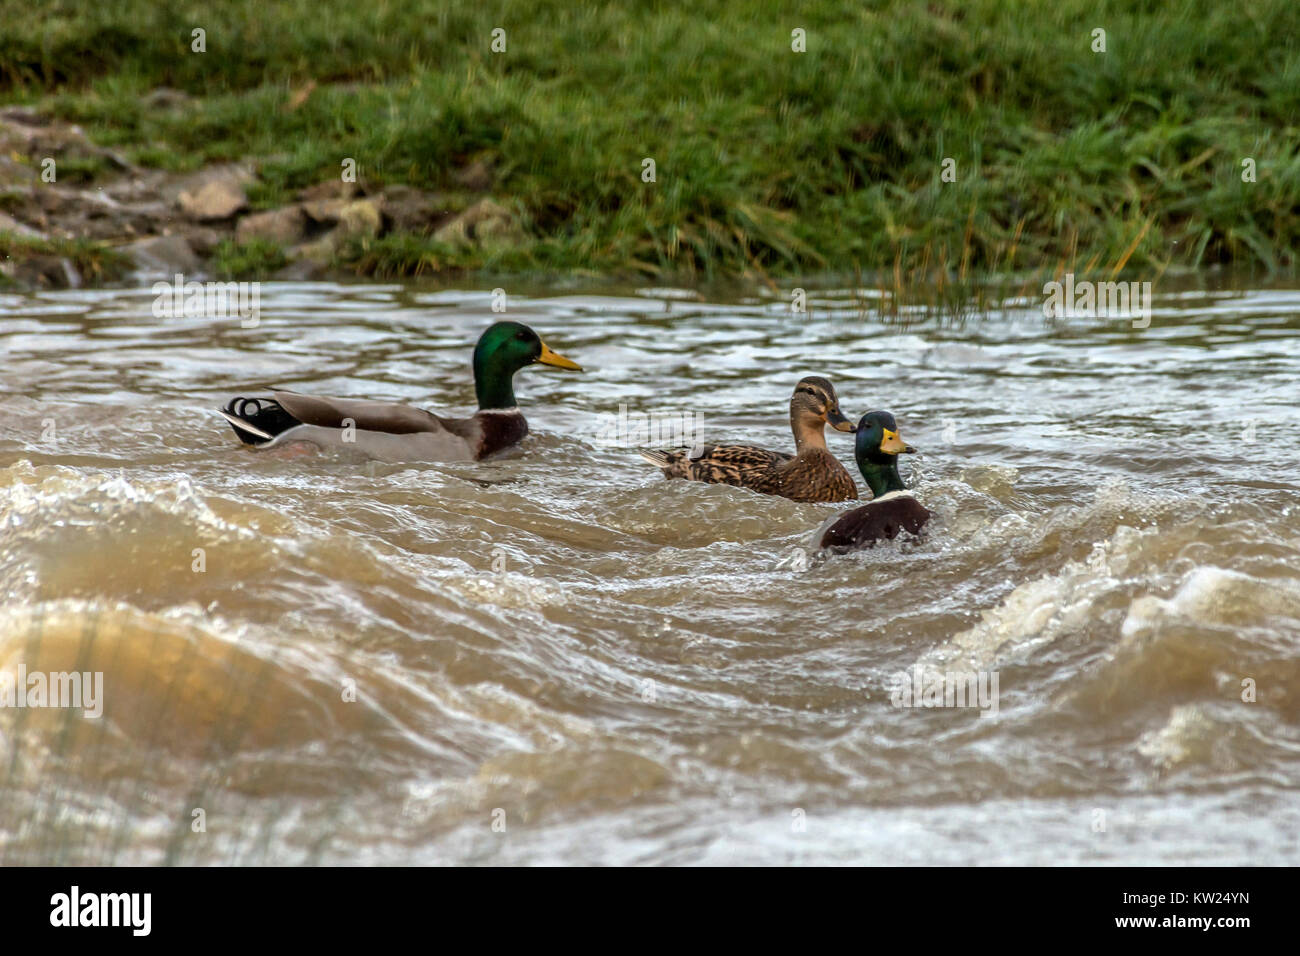 Melton Mowbray, UK. 30th December, 2017. High rain fall and melting snow, created flooded areas, river Wreake flows southwest, passing through the town center and the country park. The town has developed around the confluence of the River Eye, long history of flooding. ©Clifford Norton/Alamy Live News Stock Photo